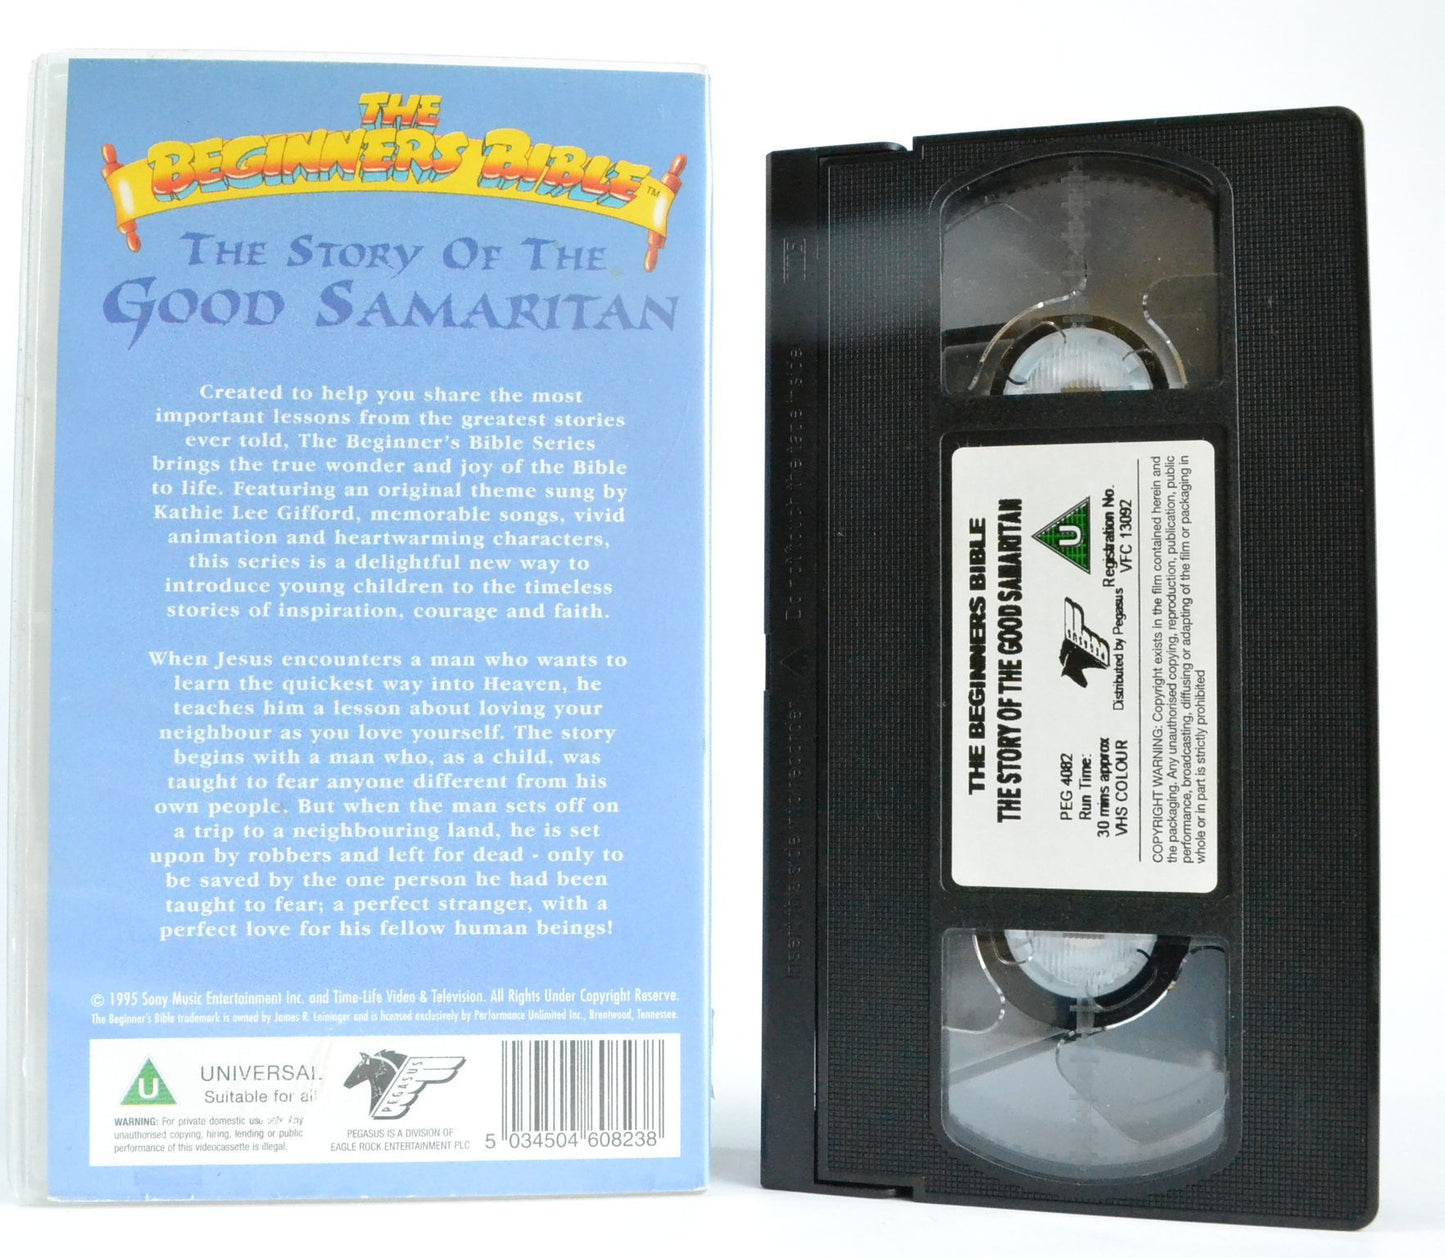 The Story Of The Good Samaritan: Beginners Bible - Moral Story Children - VHS-